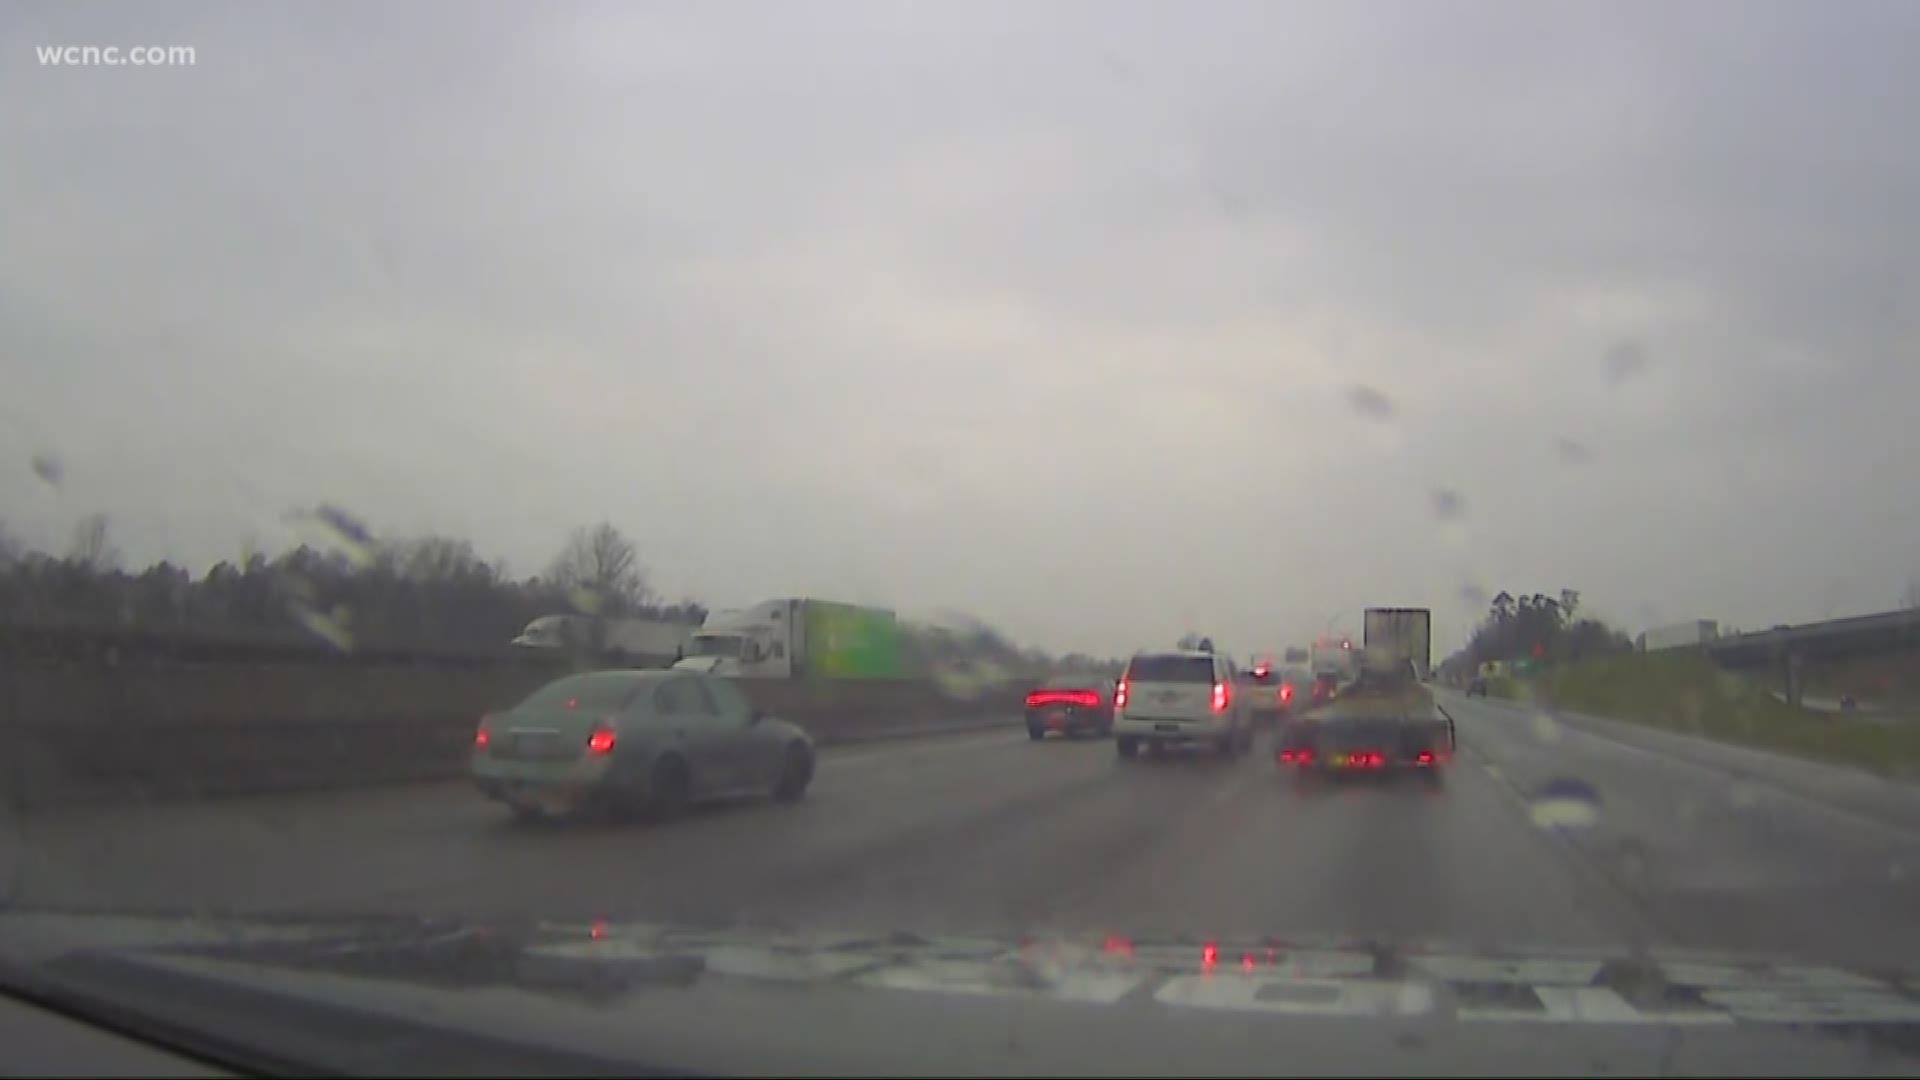 The rain combined with the evening commute has brought traffic to a crawl. The Chevy Storm Tracker has the latest on how the weather impacts the roads.